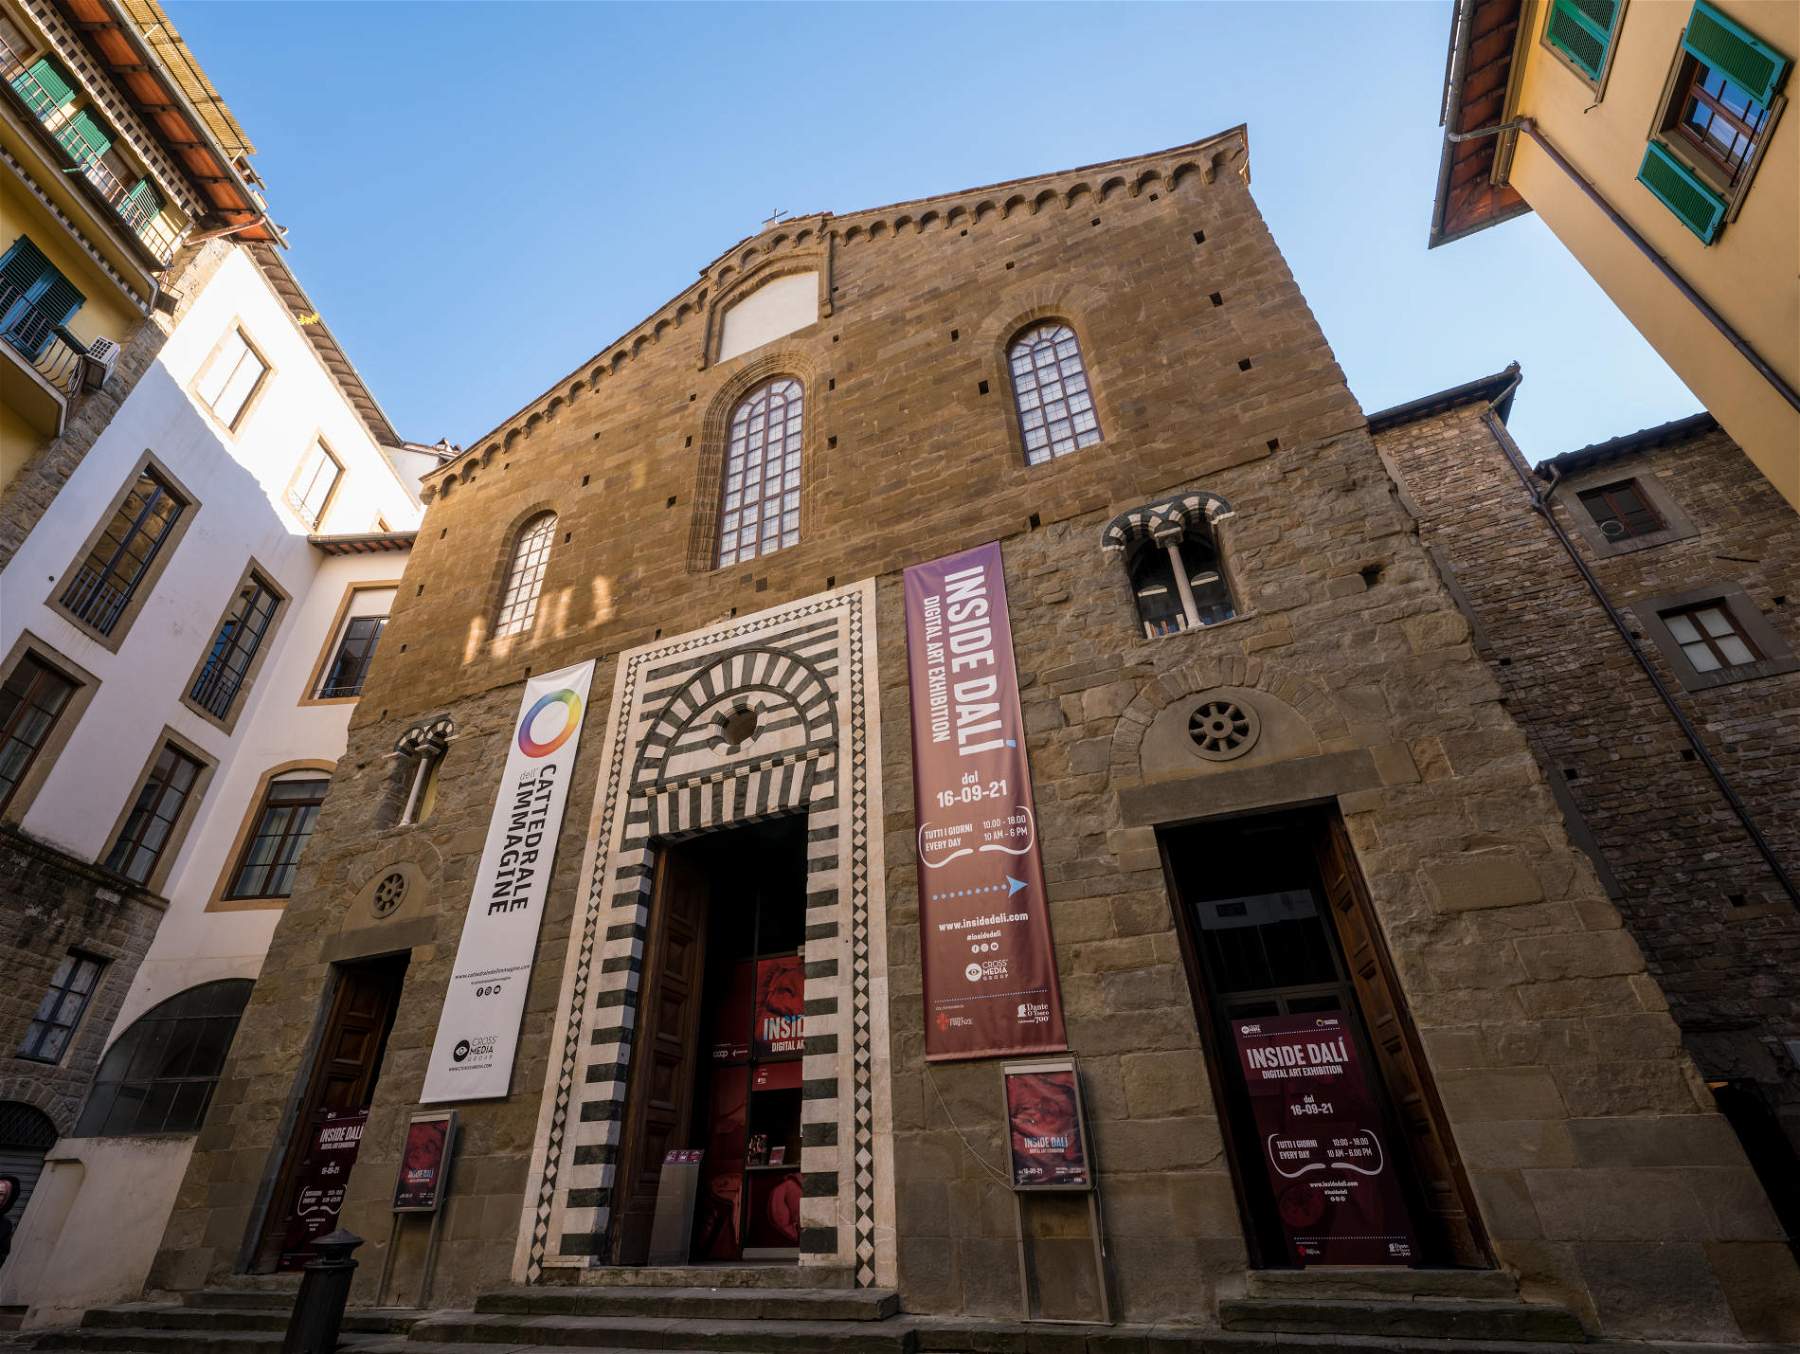 Brevissime: in Florence lectures on the history of the arts by the publishing house Centro Di